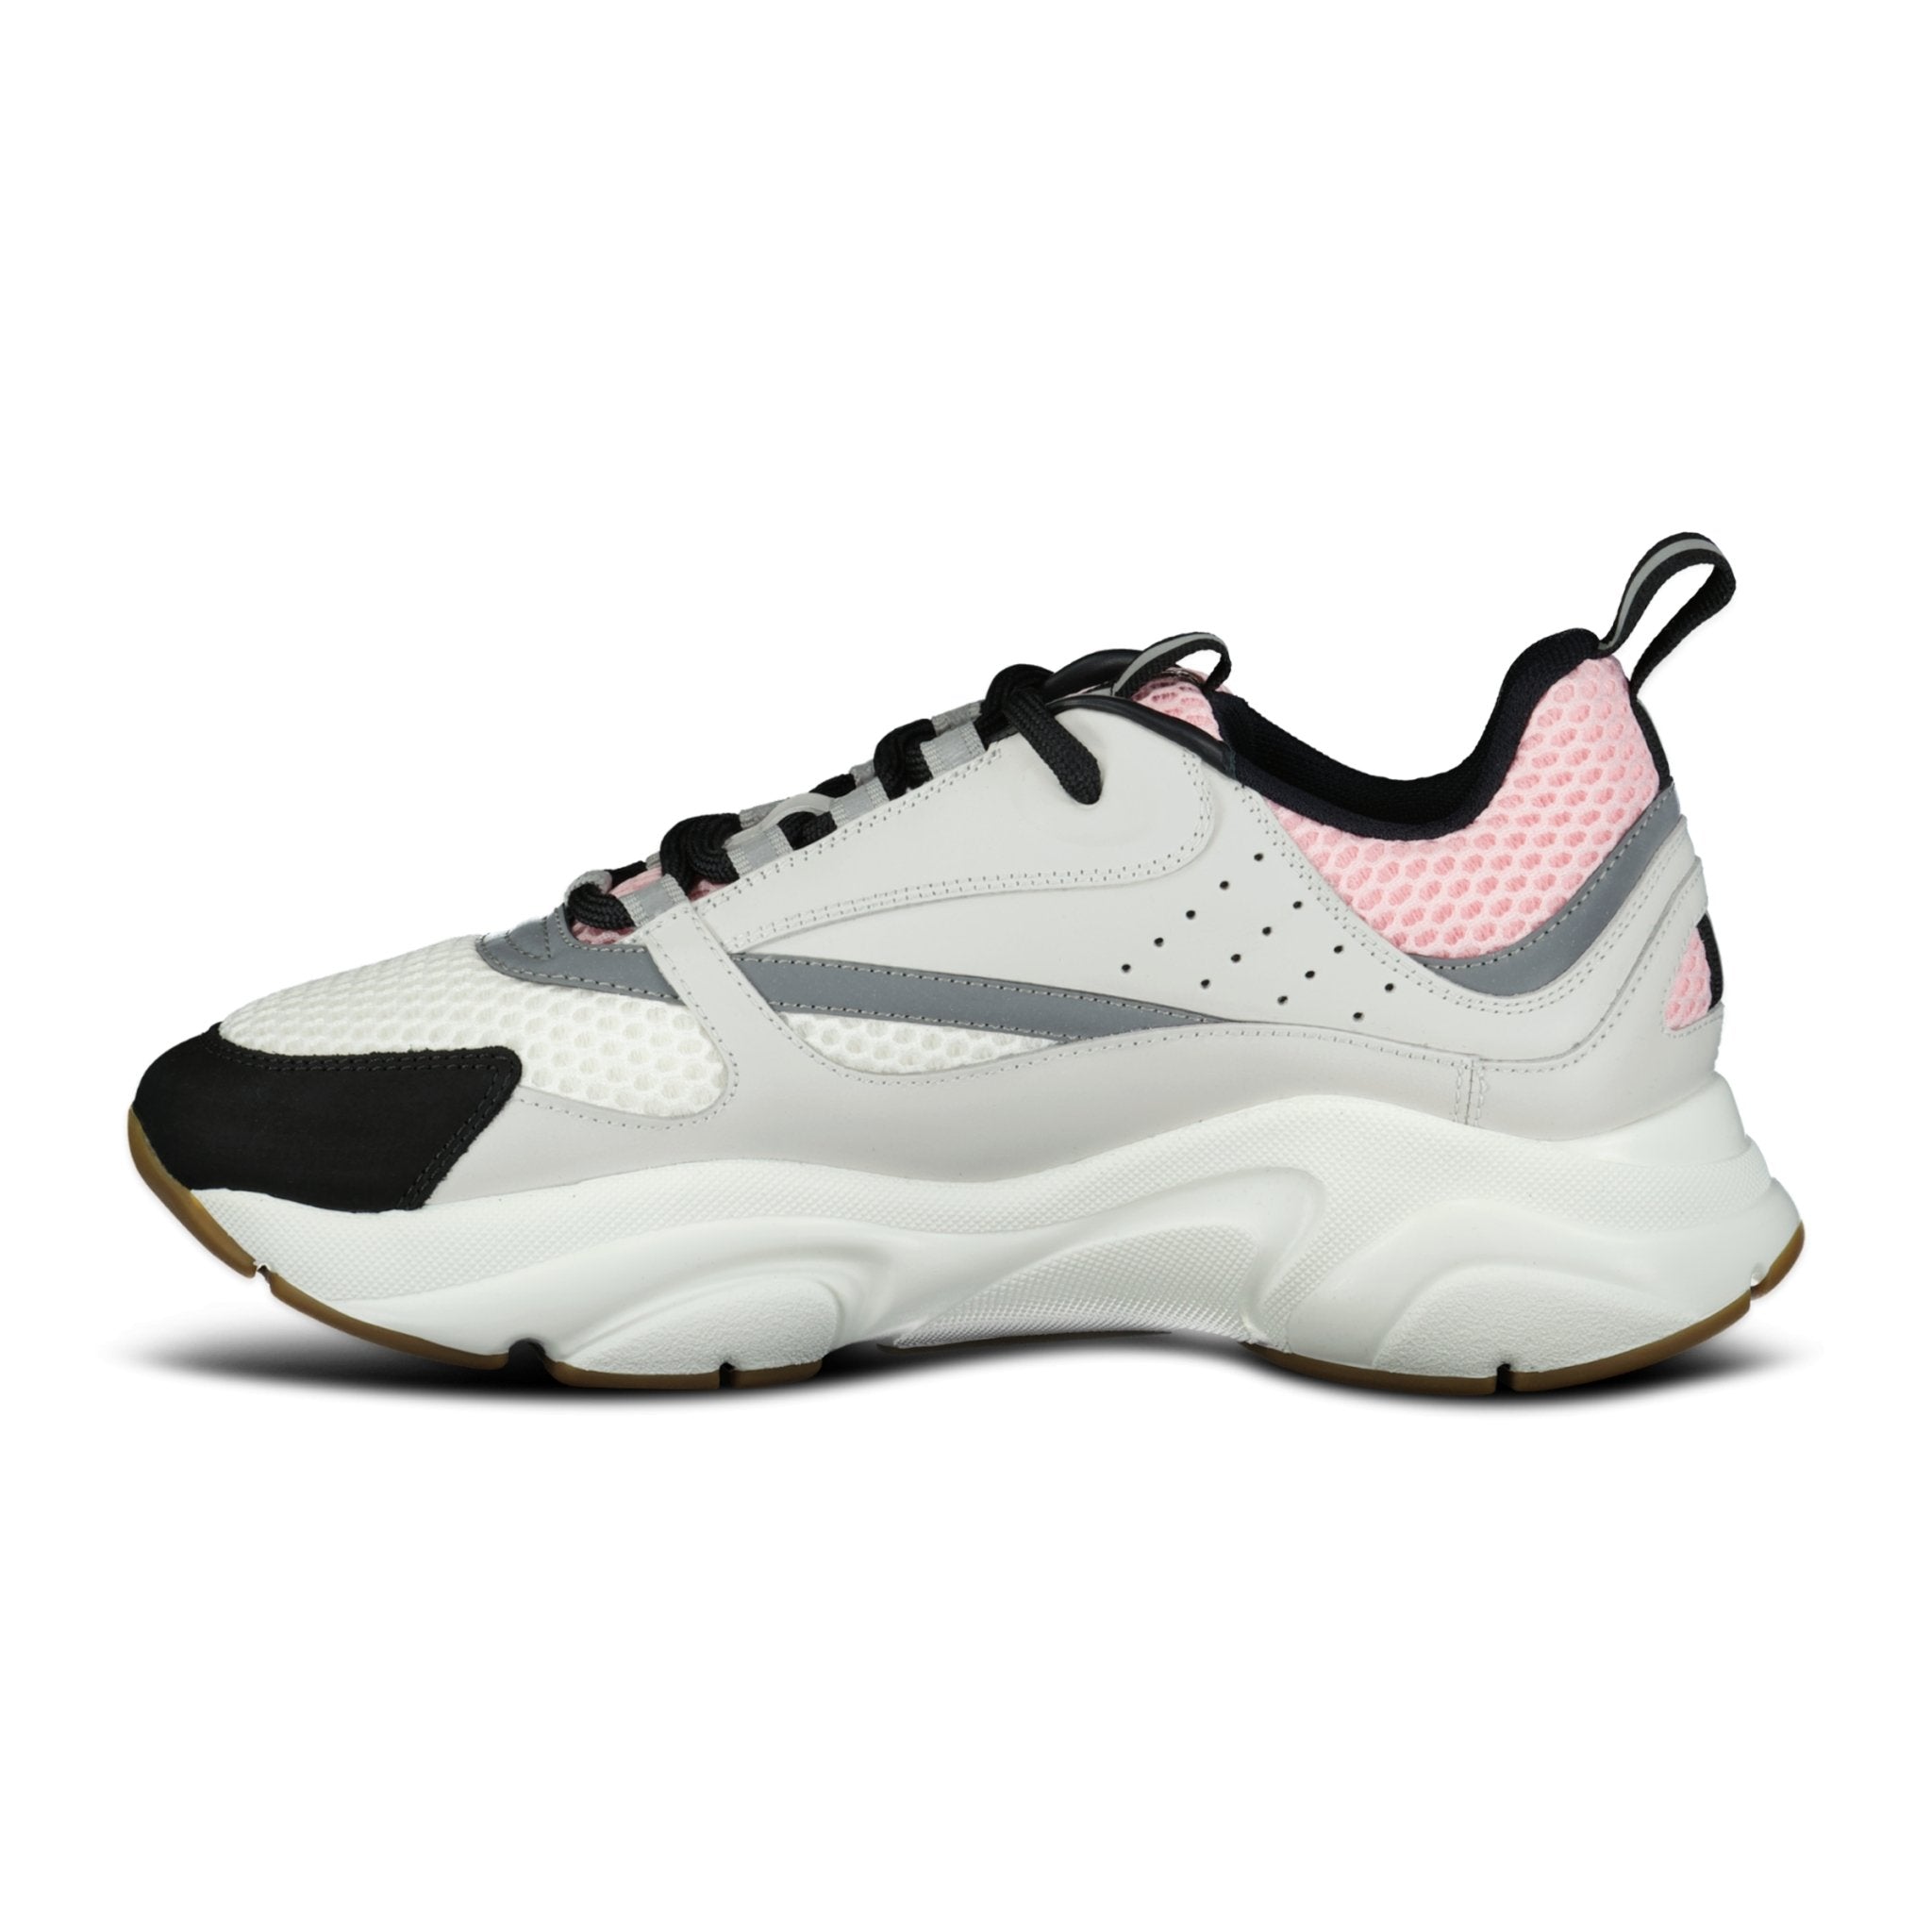 Dior B22 Pink and White Technical Mesh with Pink and Black